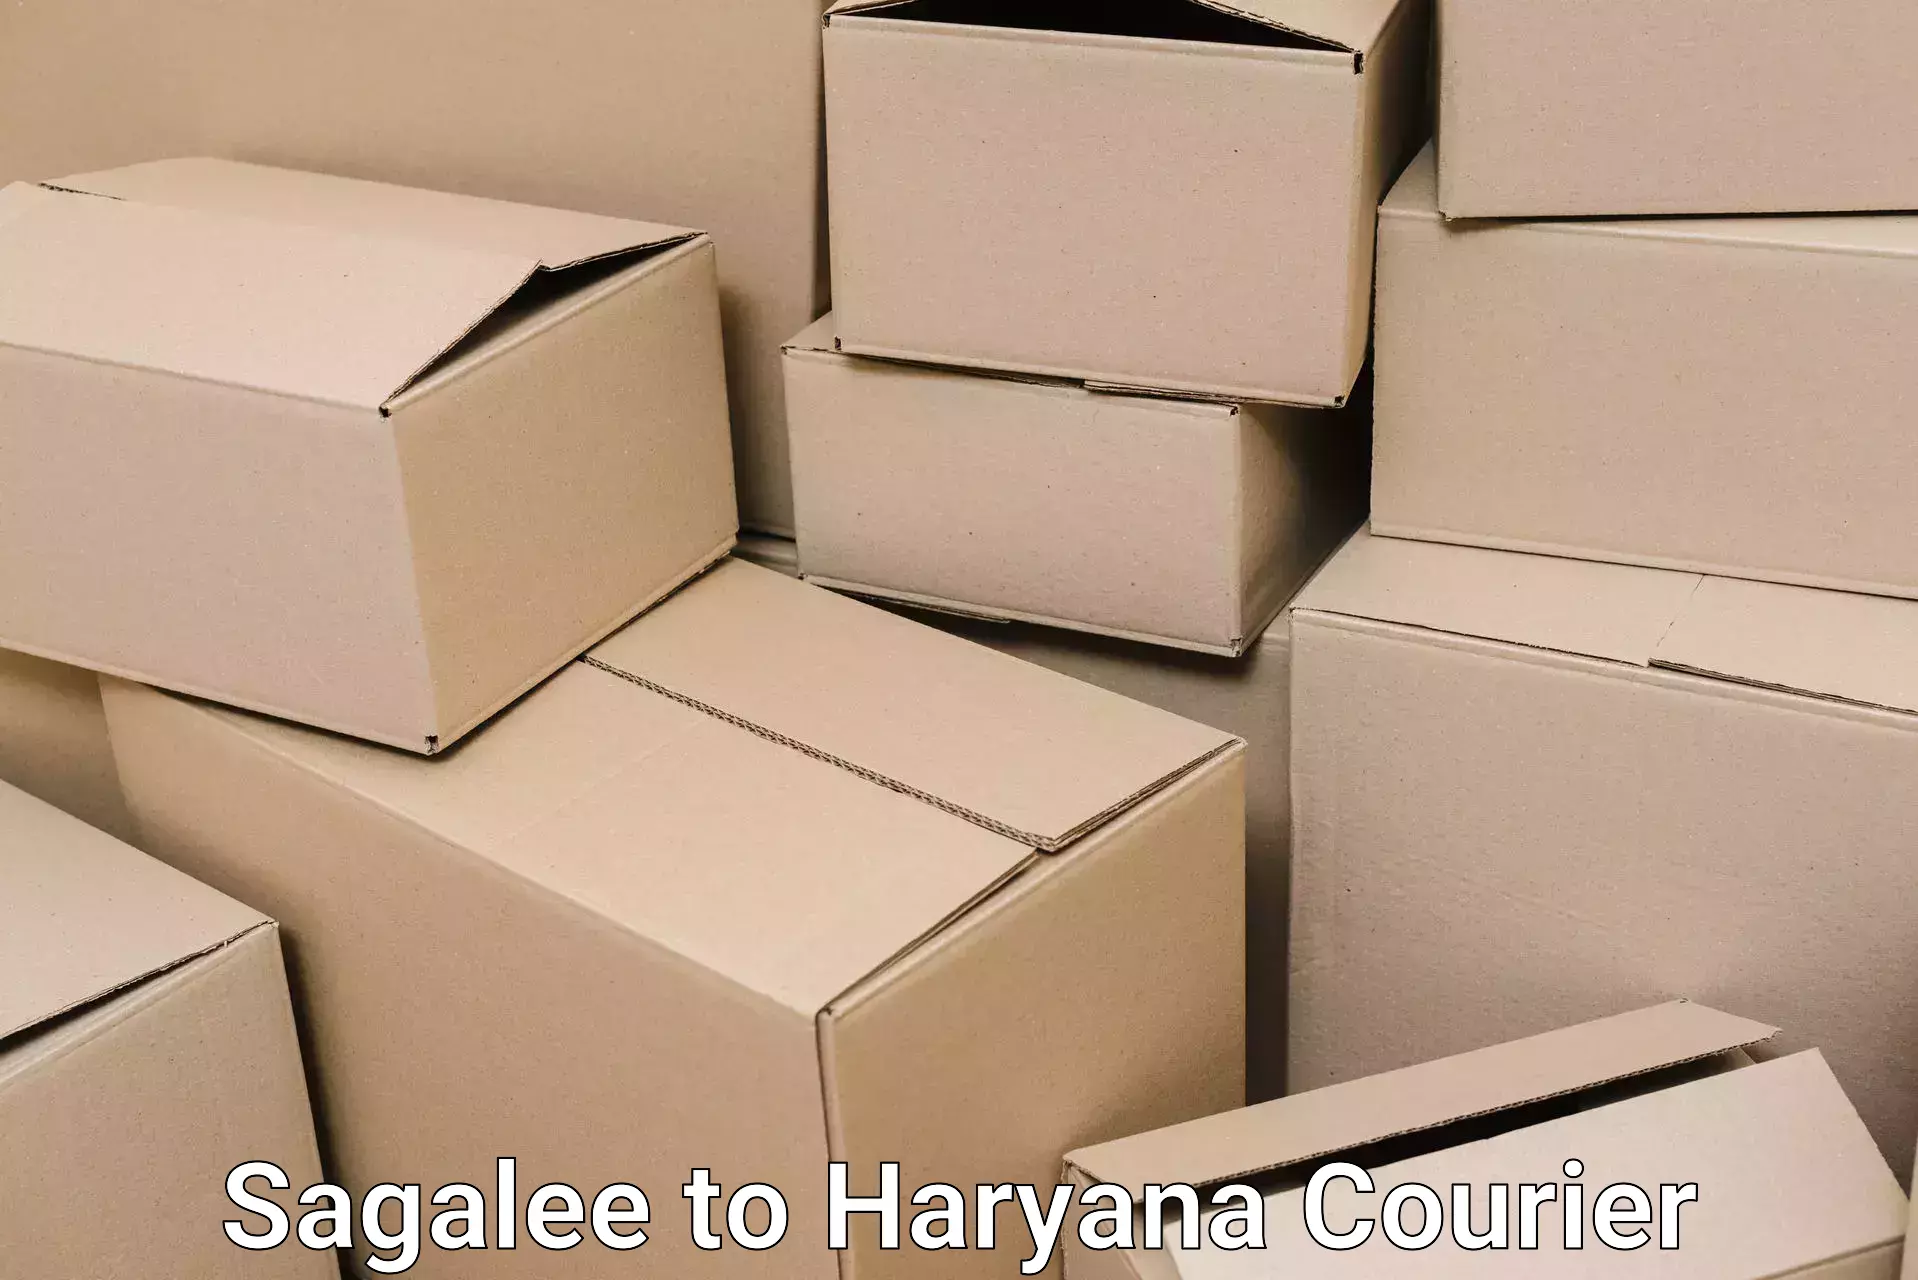 Reliable furniture transport in Sagalee to NCR Haryana